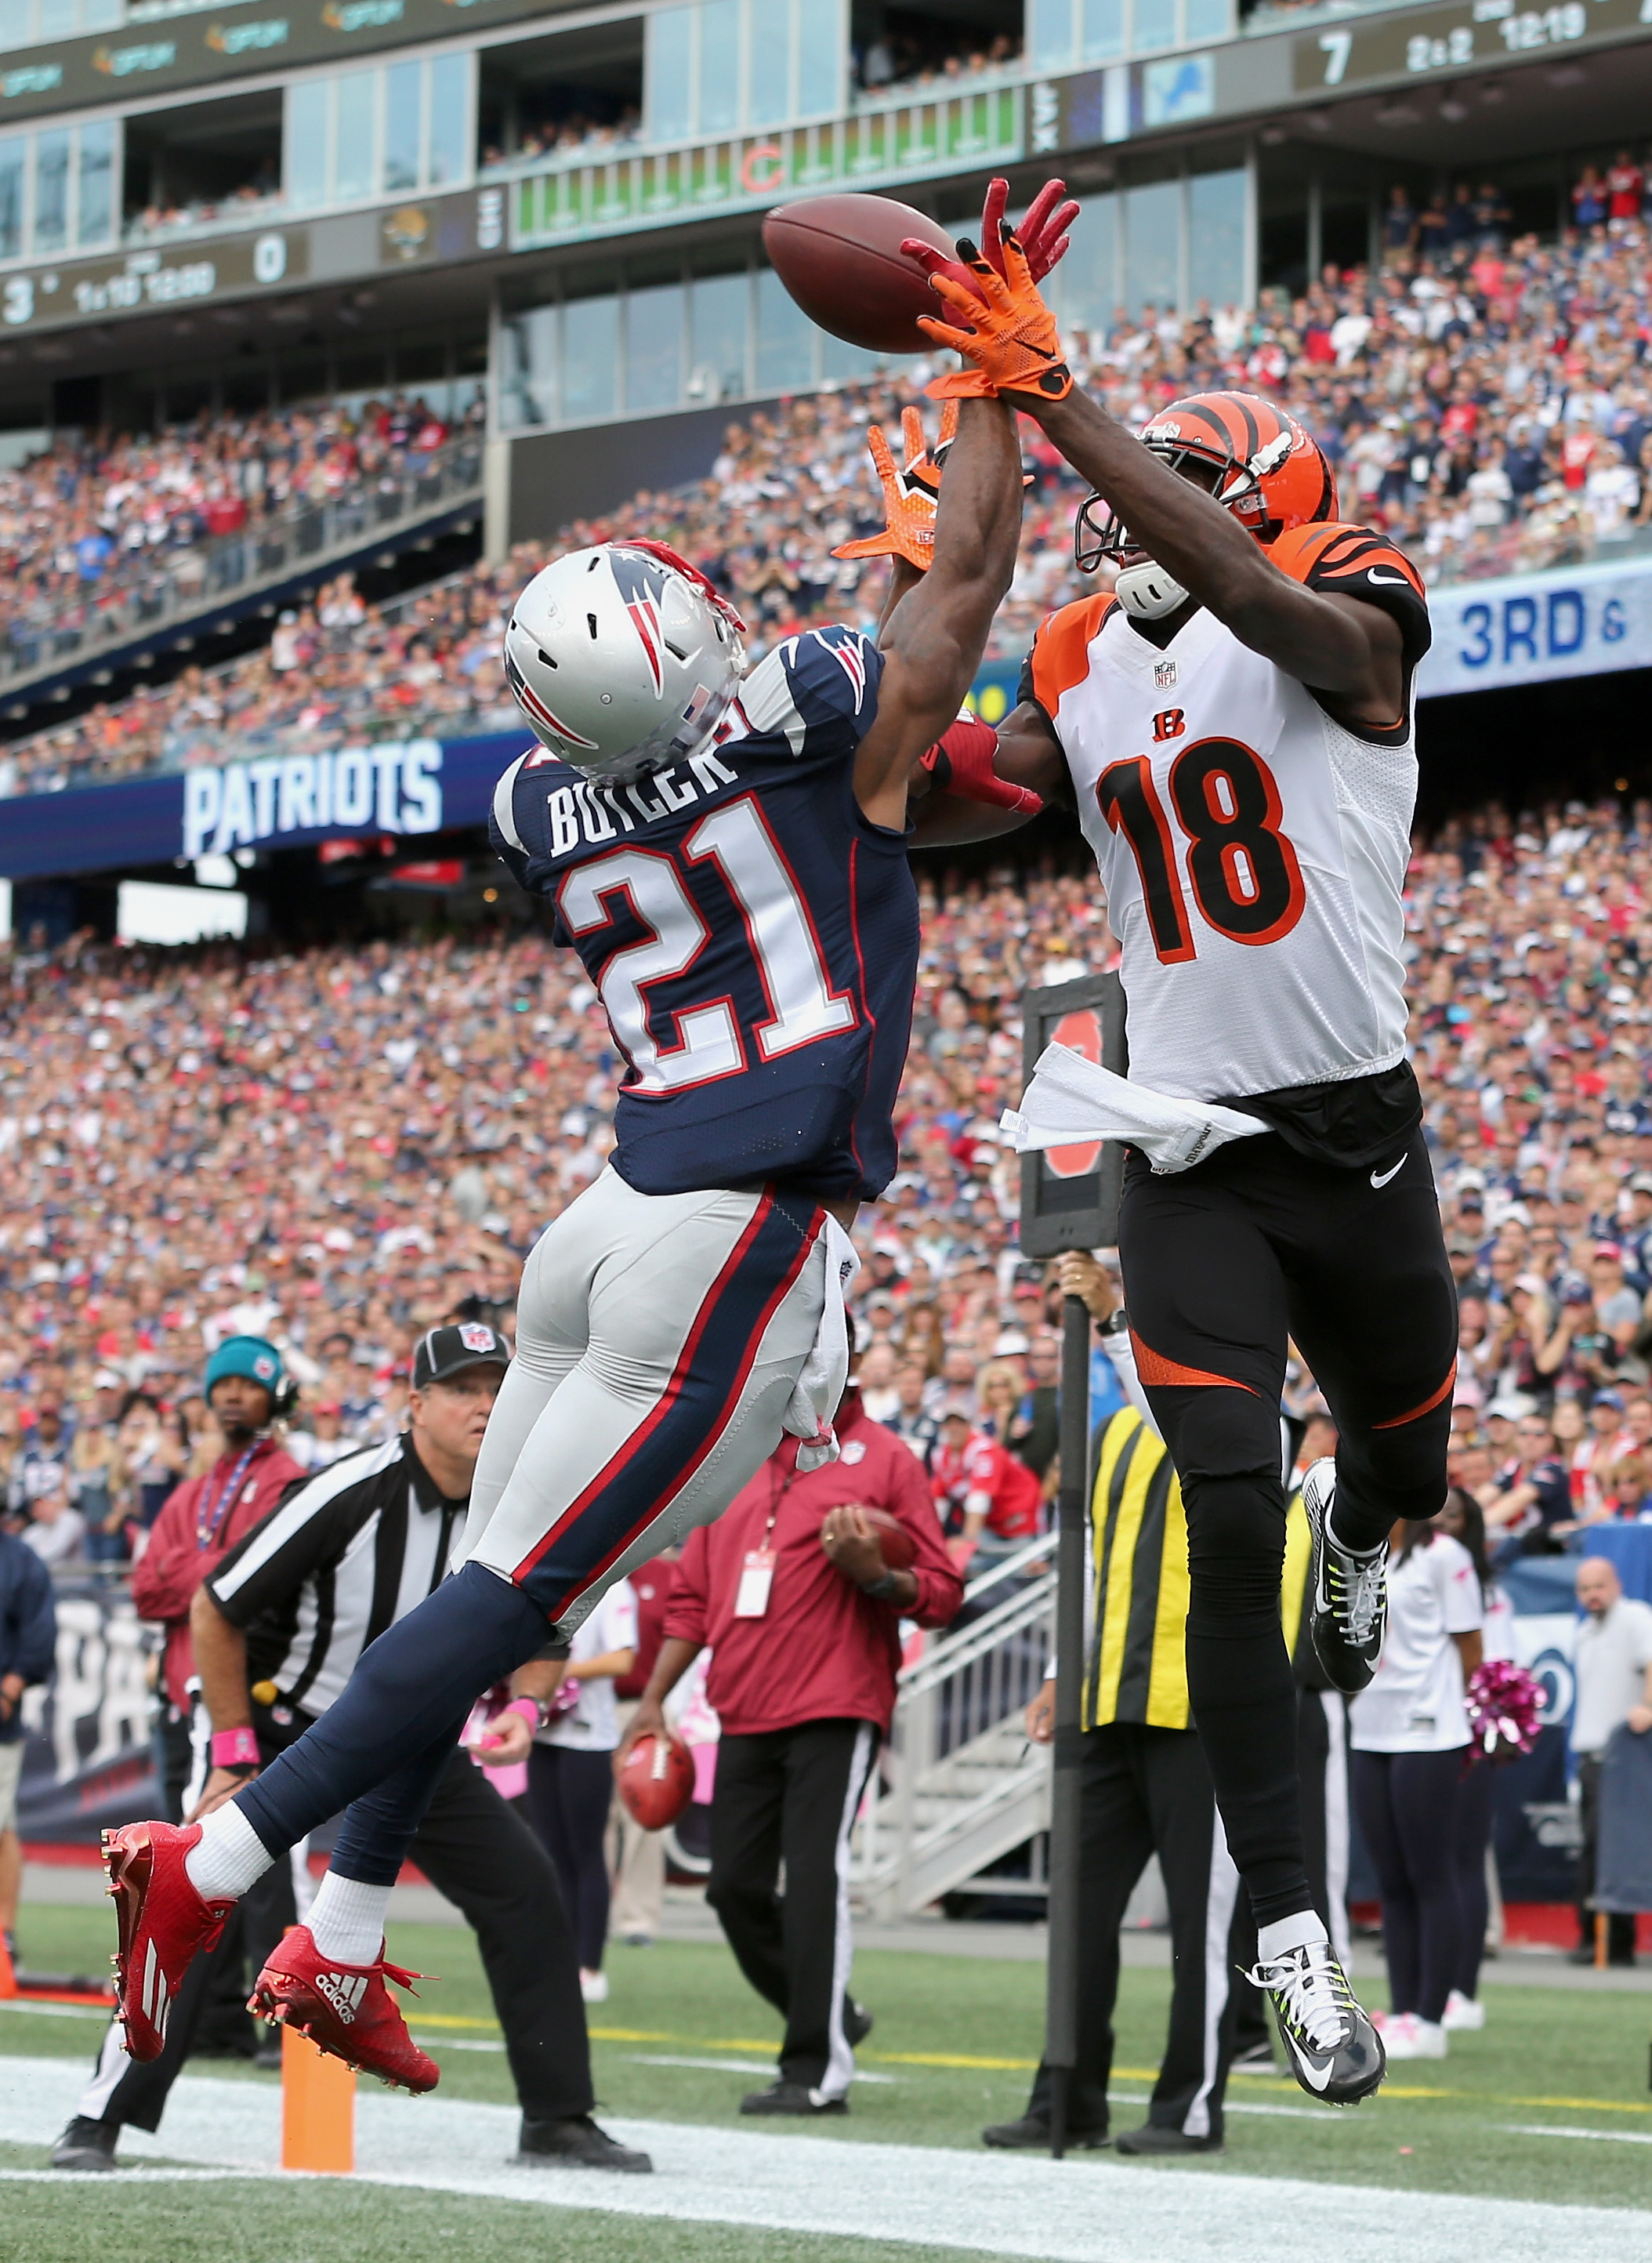 Malcolm Butler blocks a pass to A.J. Green of the Cincinnati Bengals. (Photo by Jim Rogash/Getty Images)